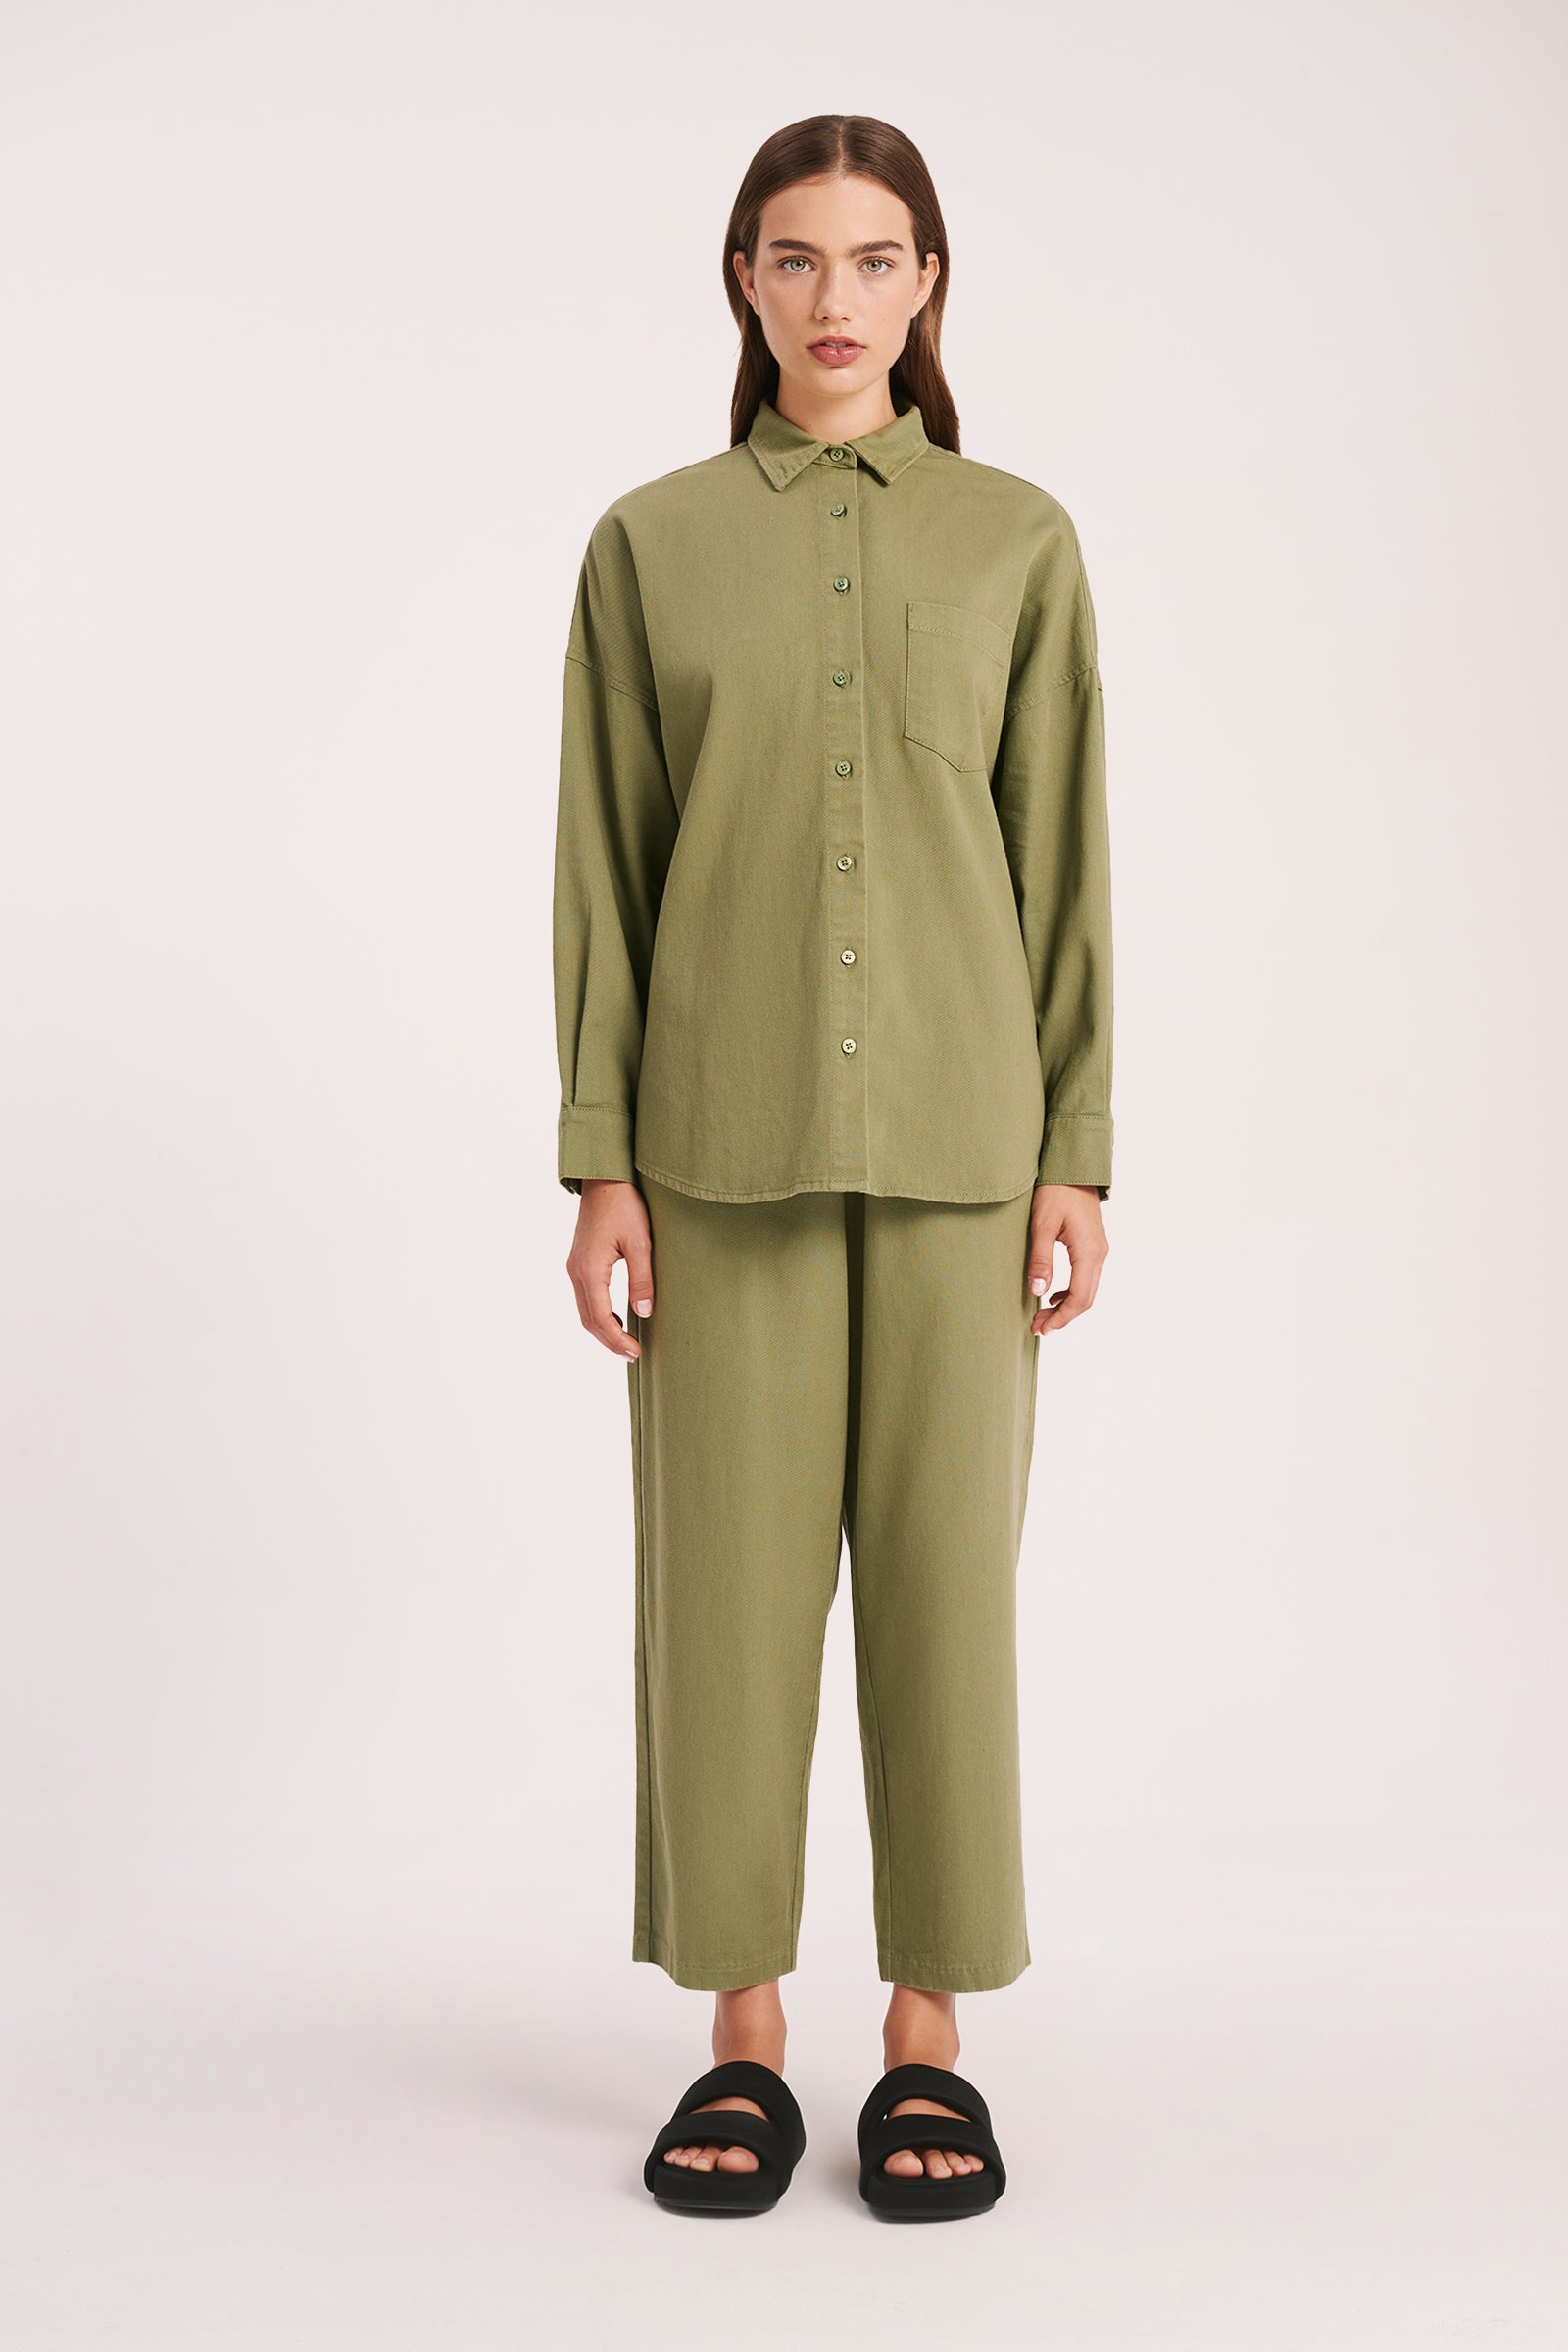 Nude Lucy Brookes Shirt In a Sage Green Colour 